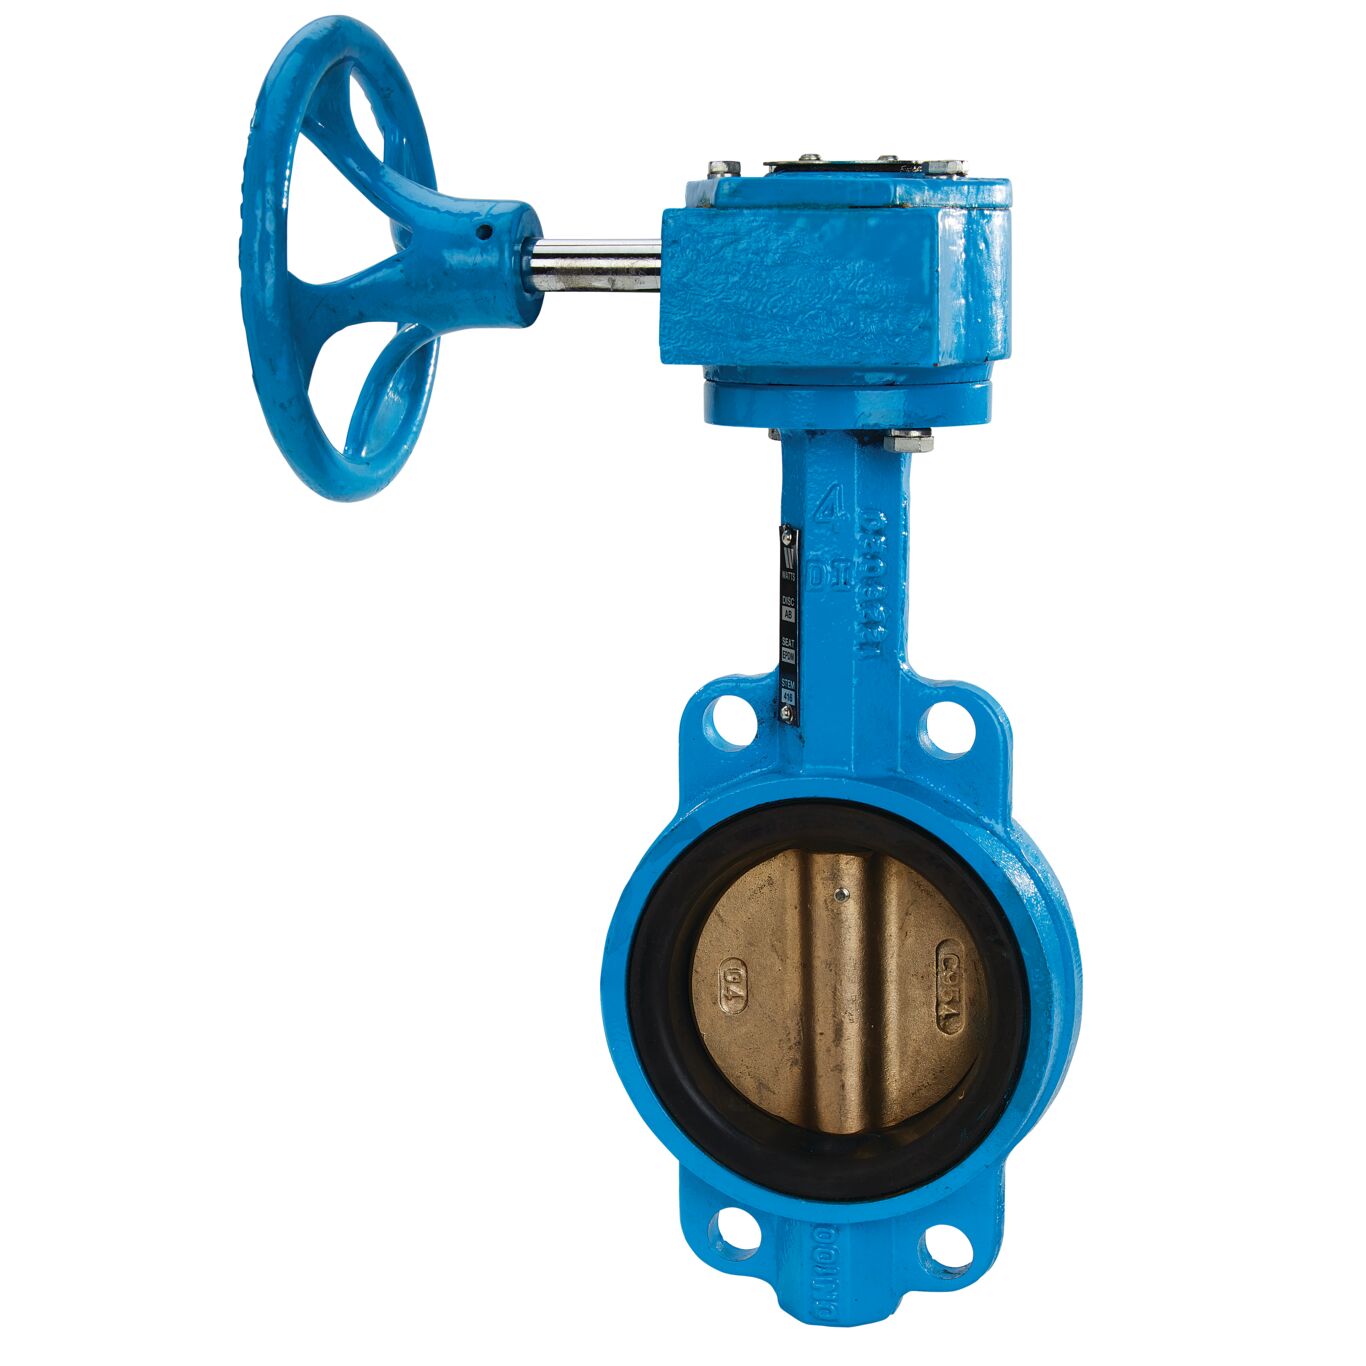 Product Image - Butterfly Valve, Wafer, Ductile Iron Body, Aluminum Bronze Disc, 416 Ss Shaft, Epdm Seat, Gear Operator